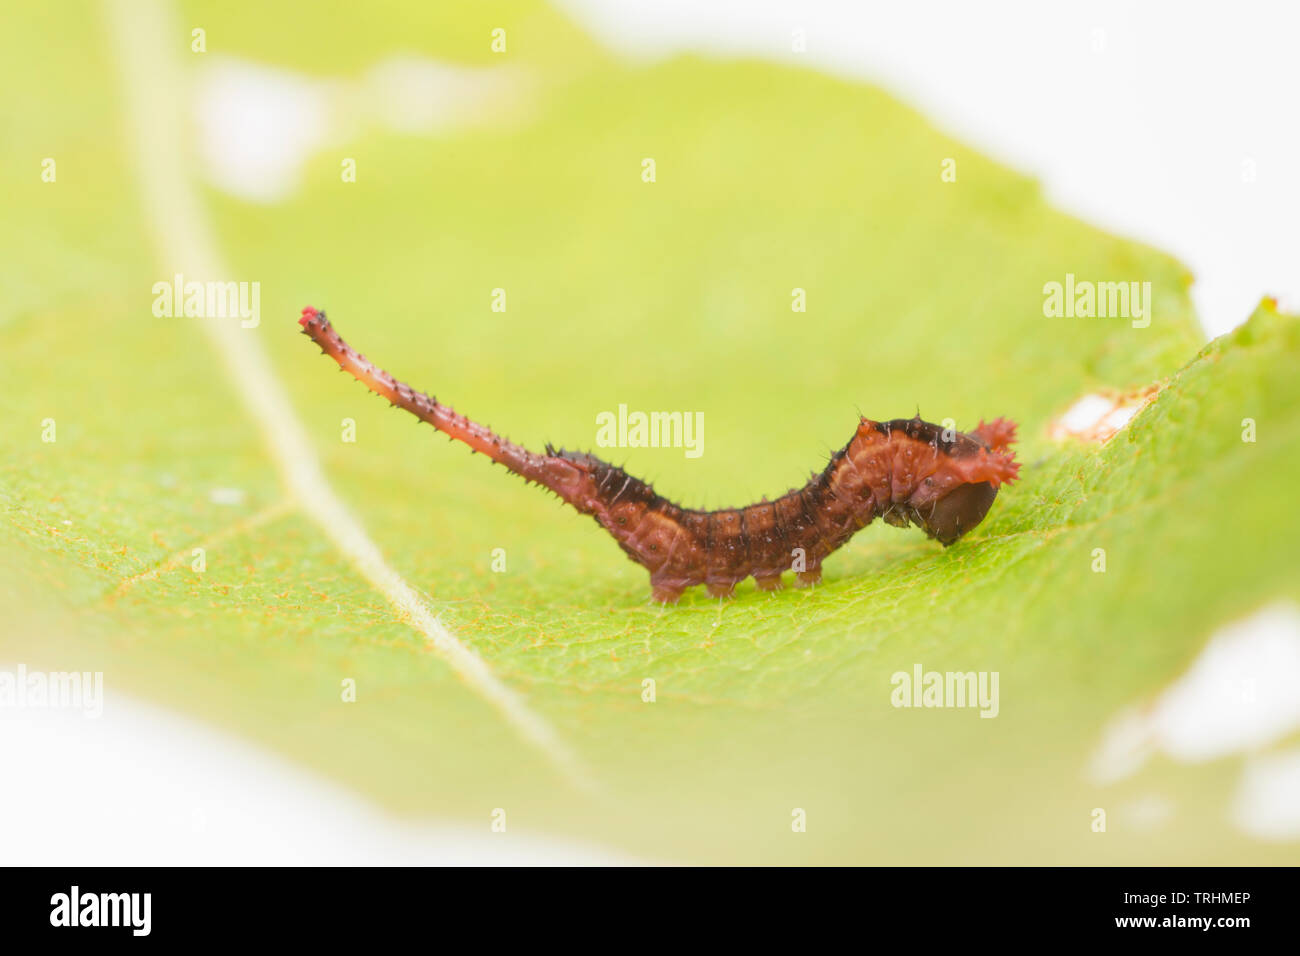 A Puss moth caterpillar, Cerura vinula, in its second stage of development, known as an instar. It is seen here on a sallow leaf which is one of its f Stock Photo